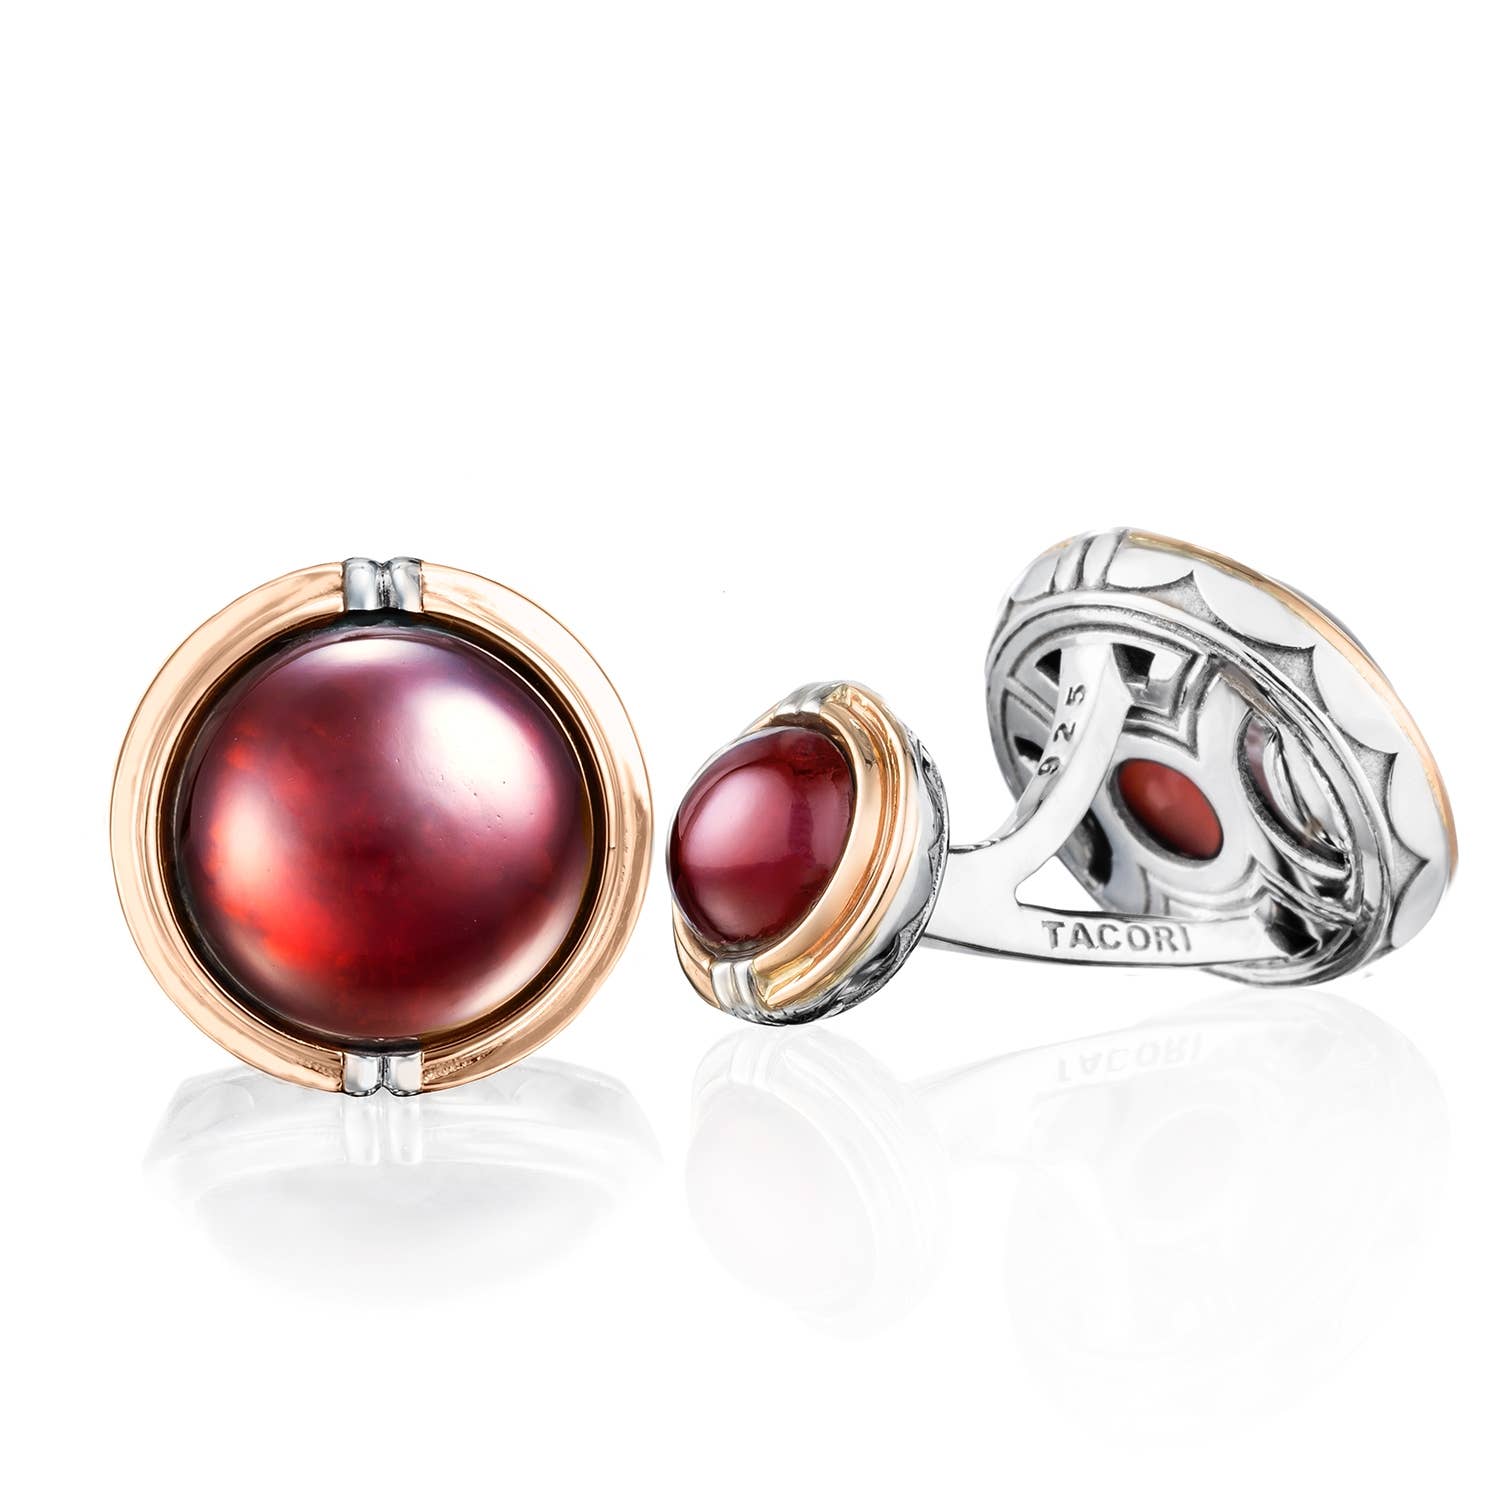 Classic Cabochon Cuff Links featuring Garnet over Mother of Pearl